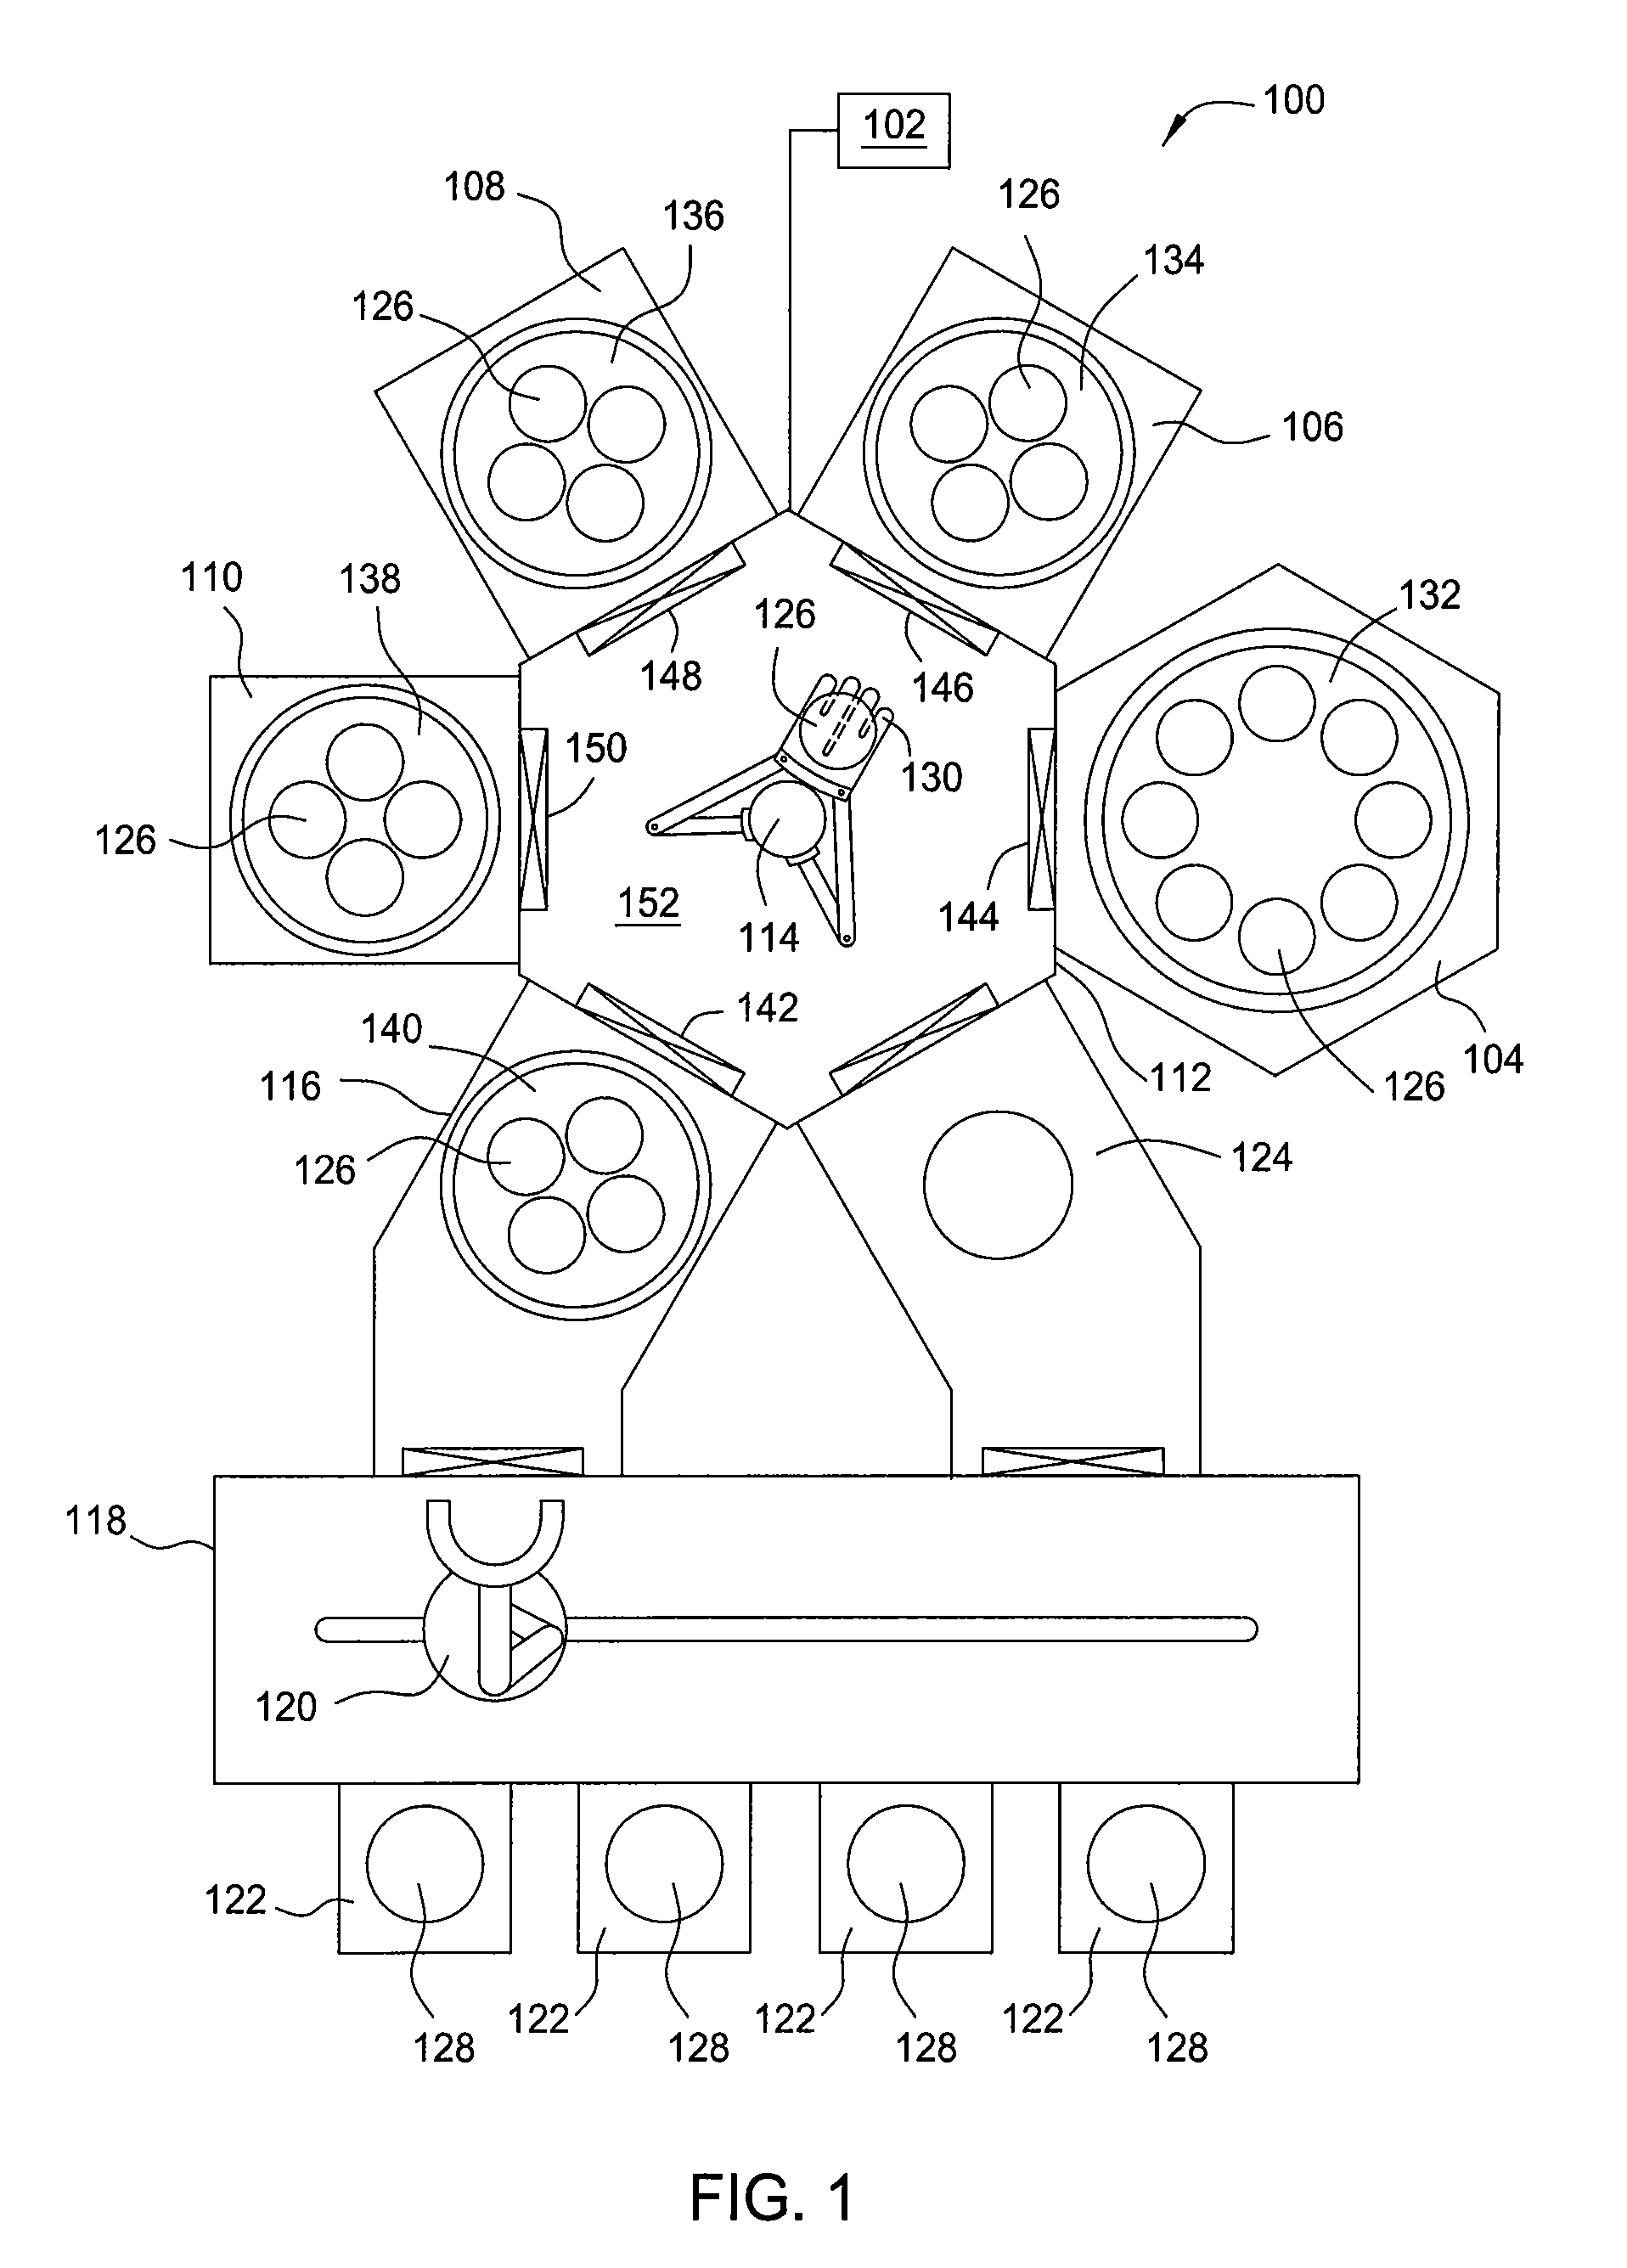 Segmented substrate loading for multiple substrate processing